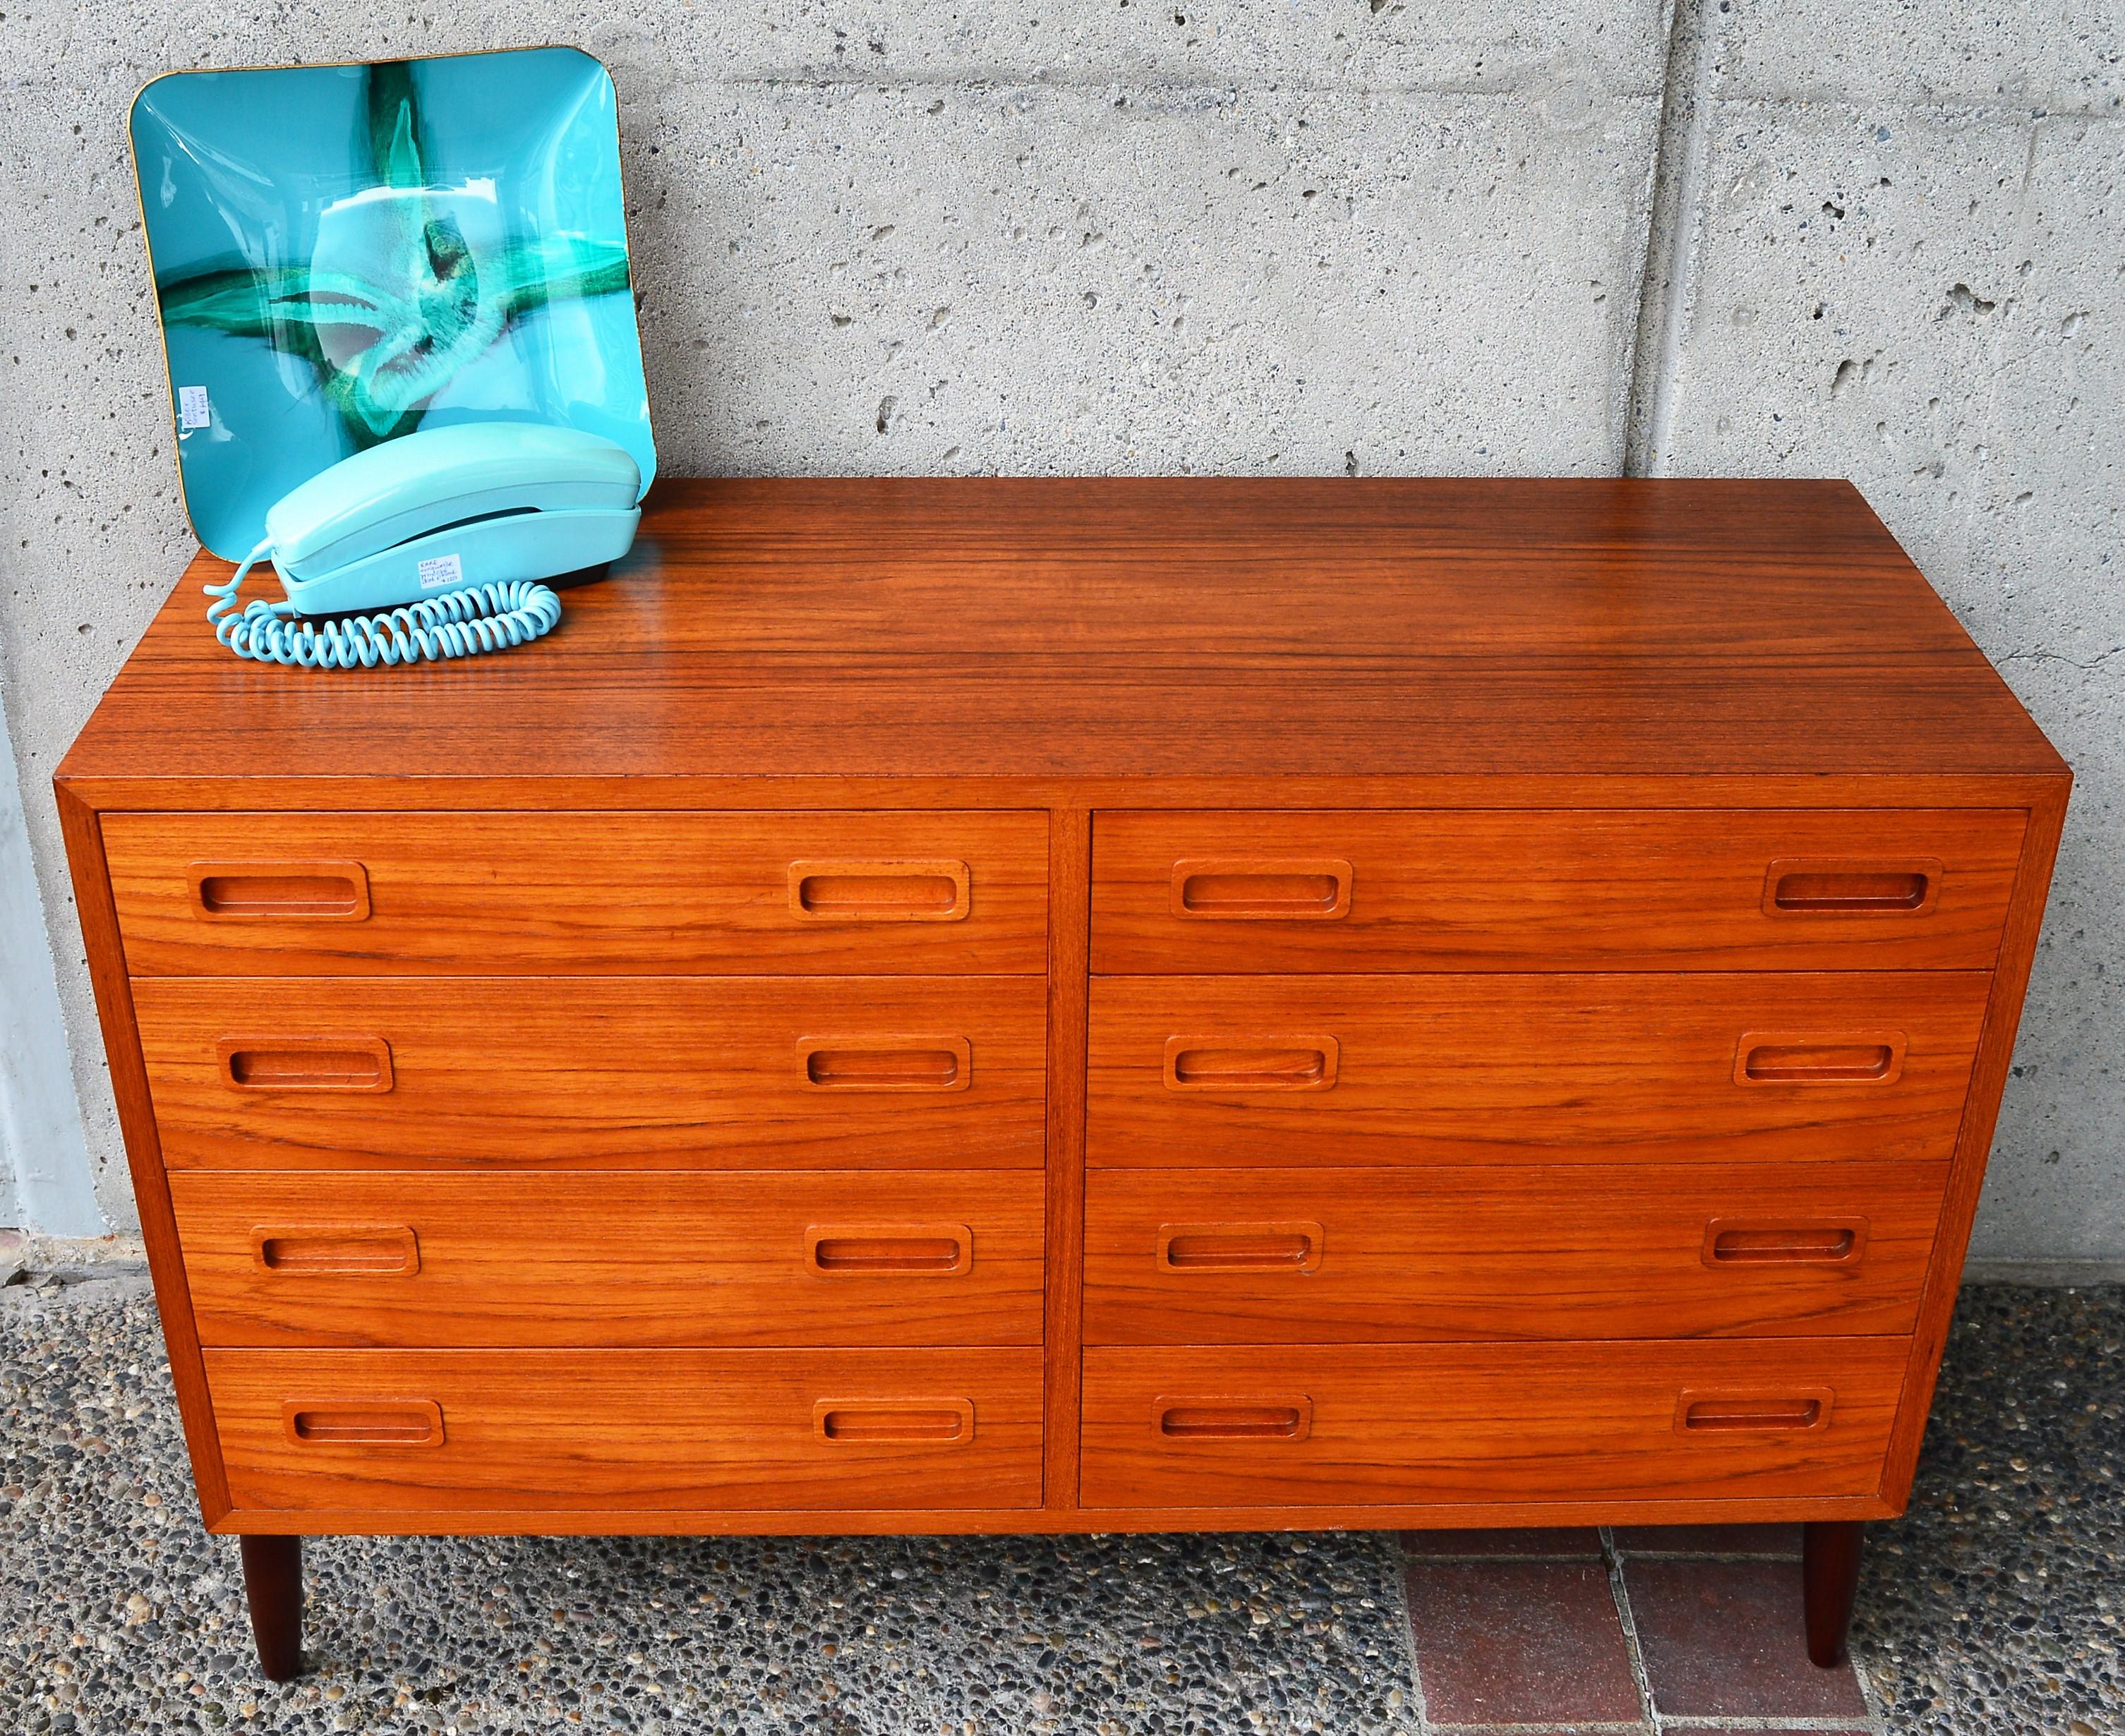 This lovely quality all hardwood Danish Modern teak compact dresser by Hundevad & Co. bears the Danish quality control medallion, as well as the branded makers mark. Clean, simple lines with 8 drawers, all with ovoid inset drawer pulls, and beech